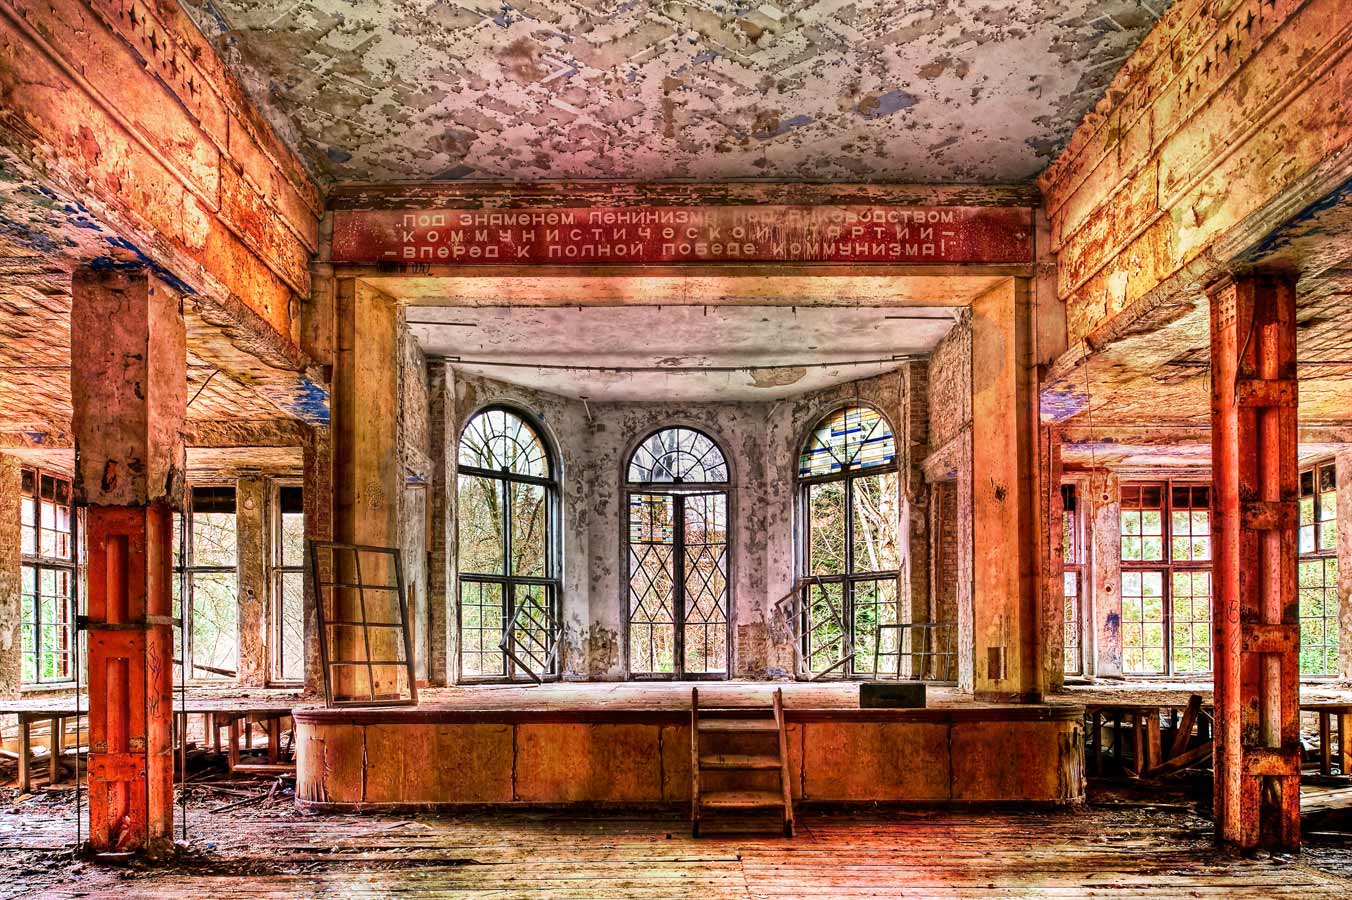 Stage Left

A former hospital, but less well known than Beelitz. Also occupied by the Soviets until the fall of the Wall, I came across this room which must have been intended to entertain the patients. Lots of detail in this image, like the curtain rings above the stage and loudspeaker holes left and right. A Russian speaking colleague translated the text above the stage, it reads: 'Beneath the Flag of Leninism, under the Rulership of the Communist Party - Forward to the Total Victory of Communism'. I spent some time here thinking about the shot and waiting for the wobbly floorboards to settle! I used a shift lens for this image to take in the upper converging lines leading to the stage.